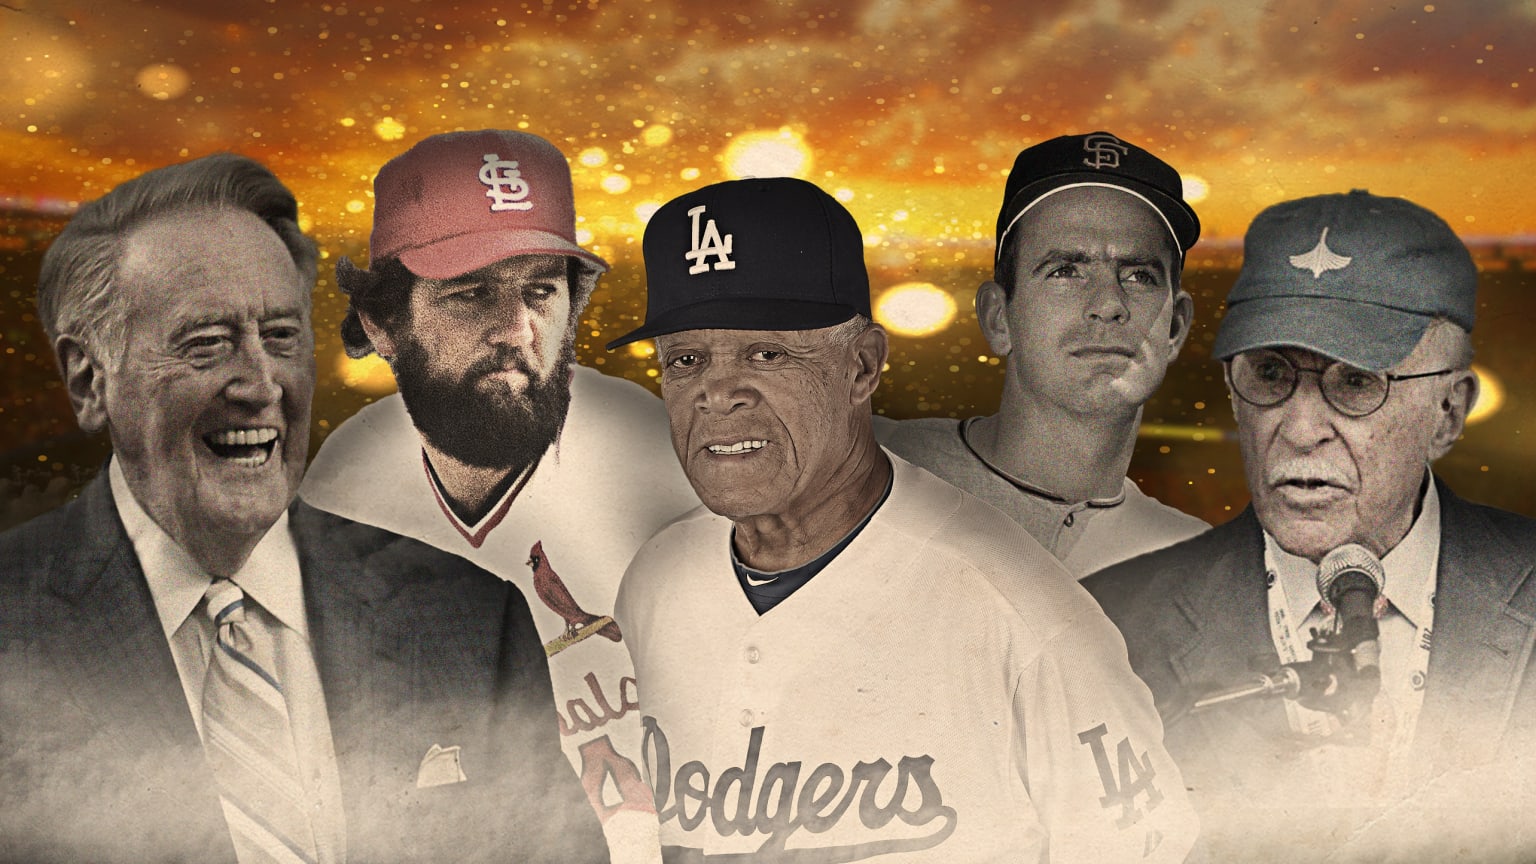 A photo montage of 5 baseball greats lost in 2022: Vin Scully, Bruce Sutter, Maury Wills, Gaylord Perry and Roger Angell